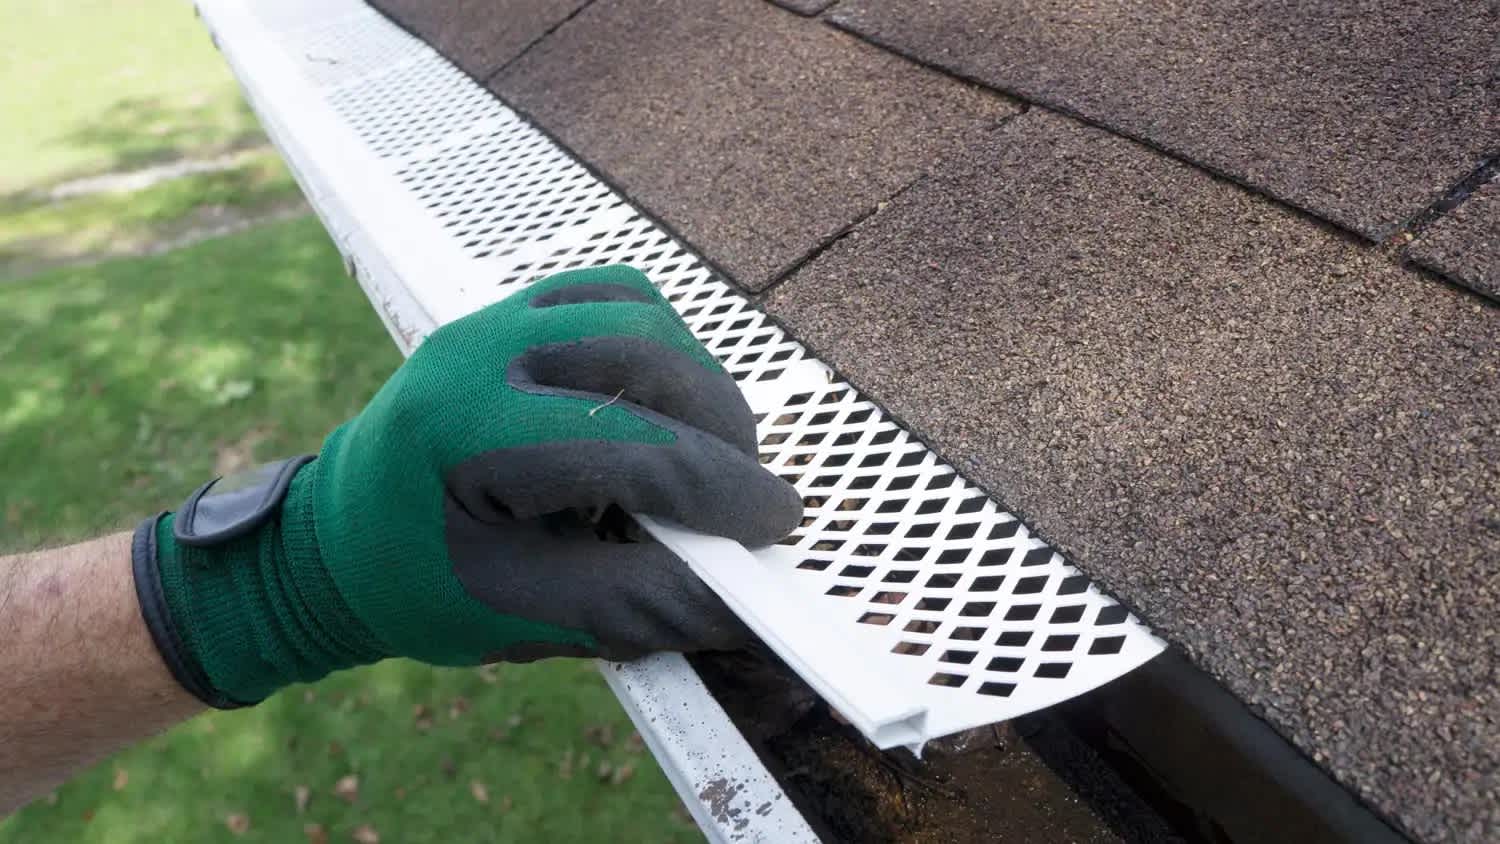 Gutter Covers and Gutter Guard Systems: Pros and Cons